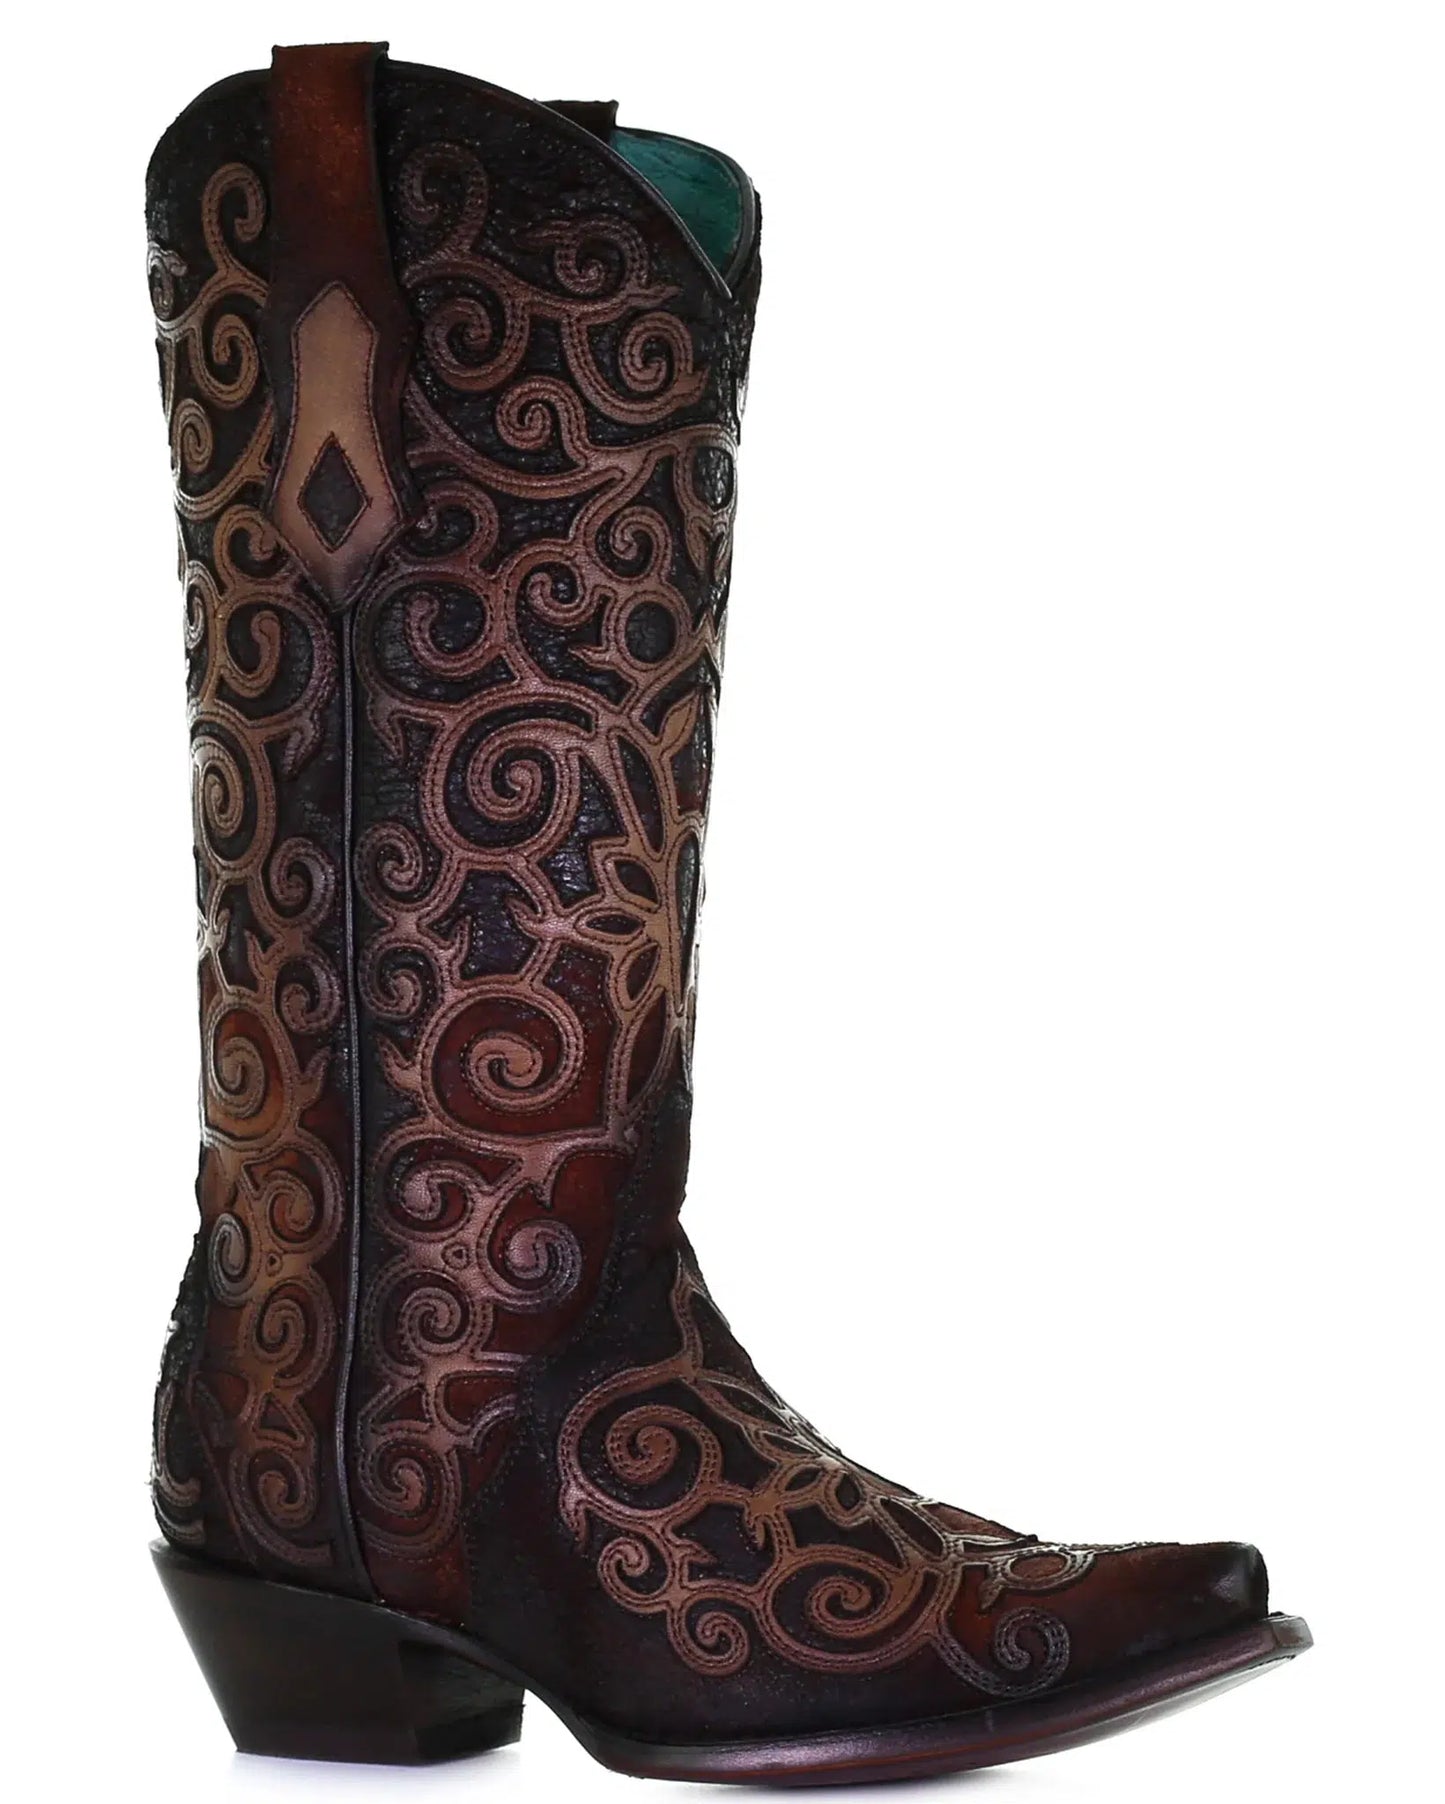 C3744-M Corral brown and red cowhide leather boots for women